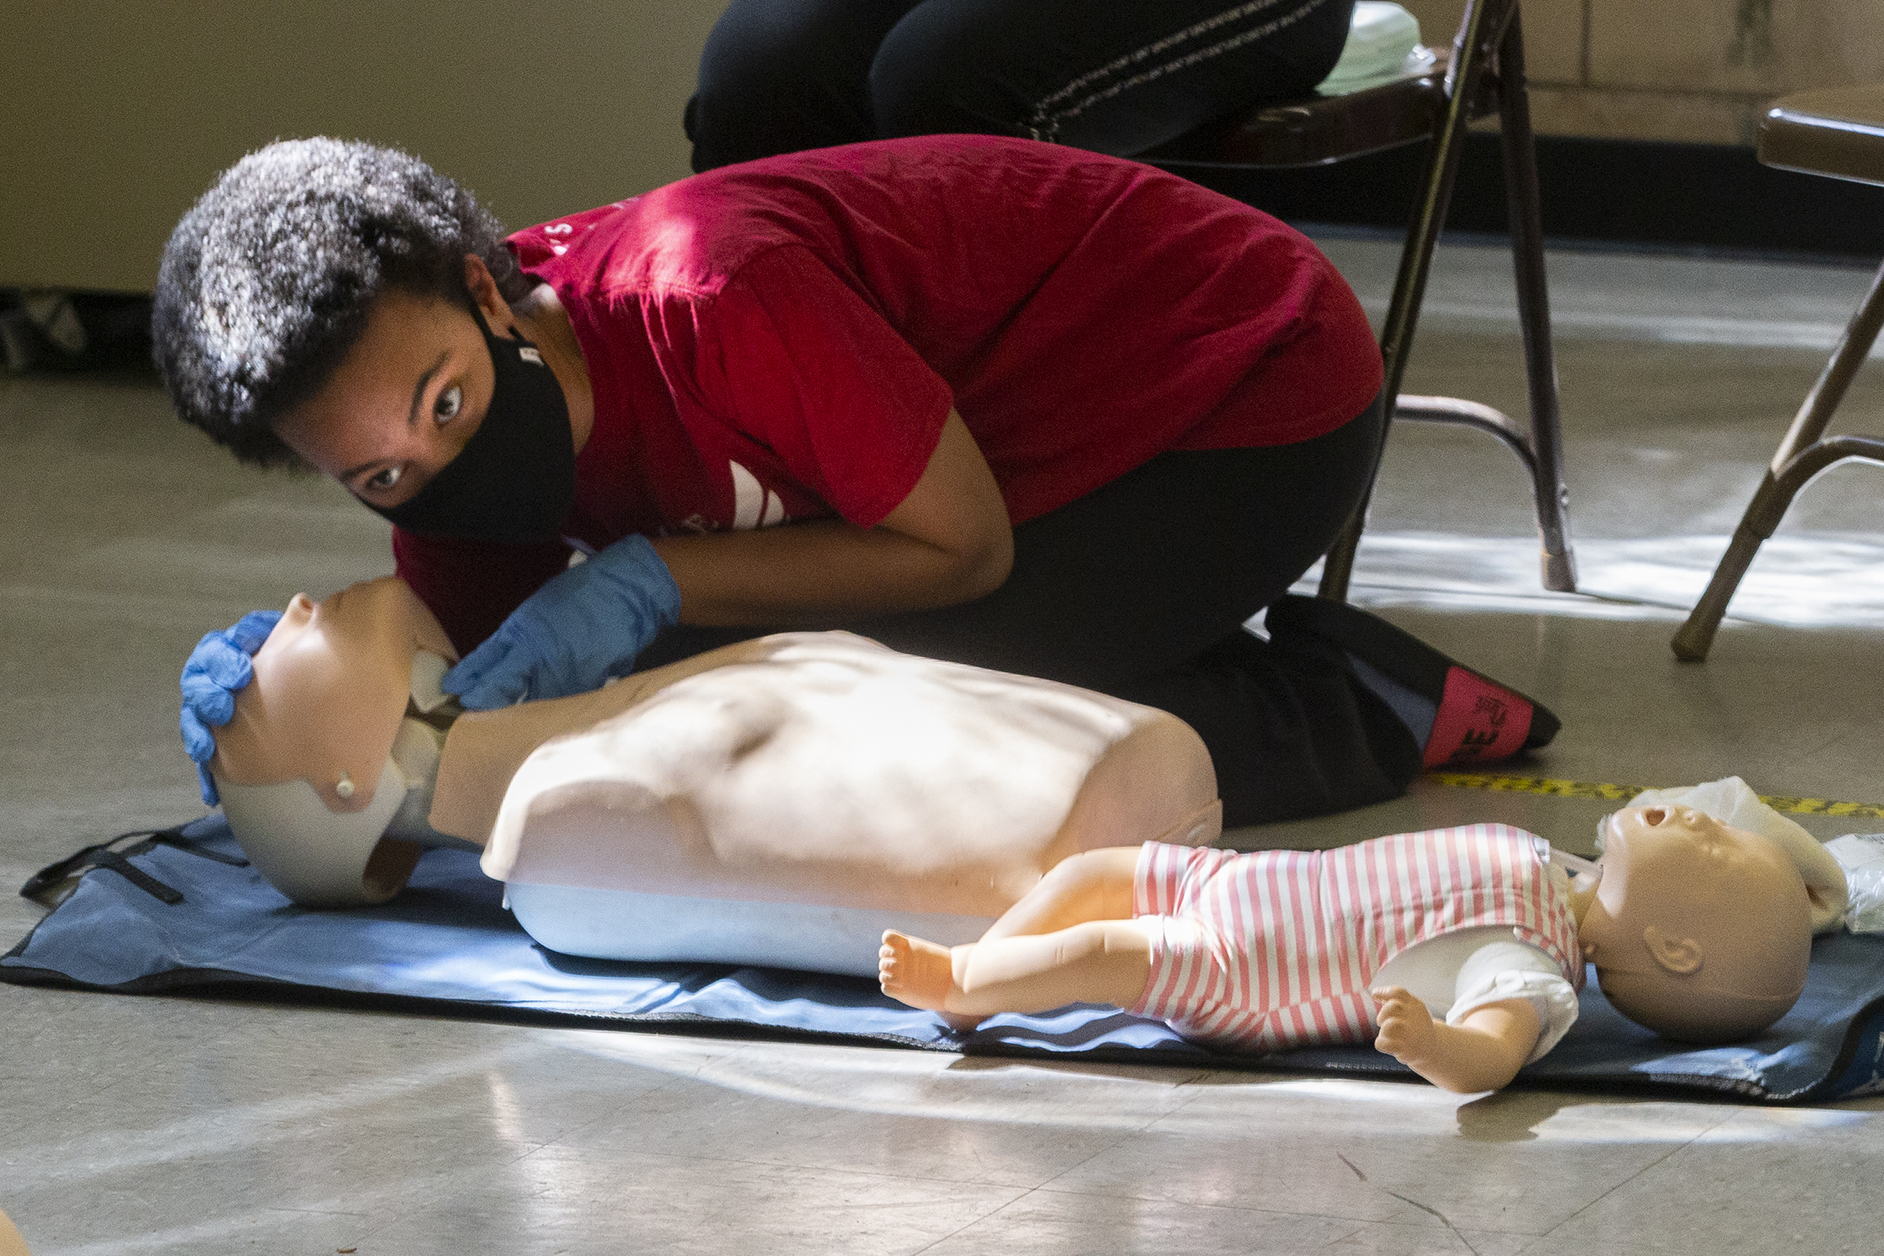 Why we should all know CPR | Expert Opinion